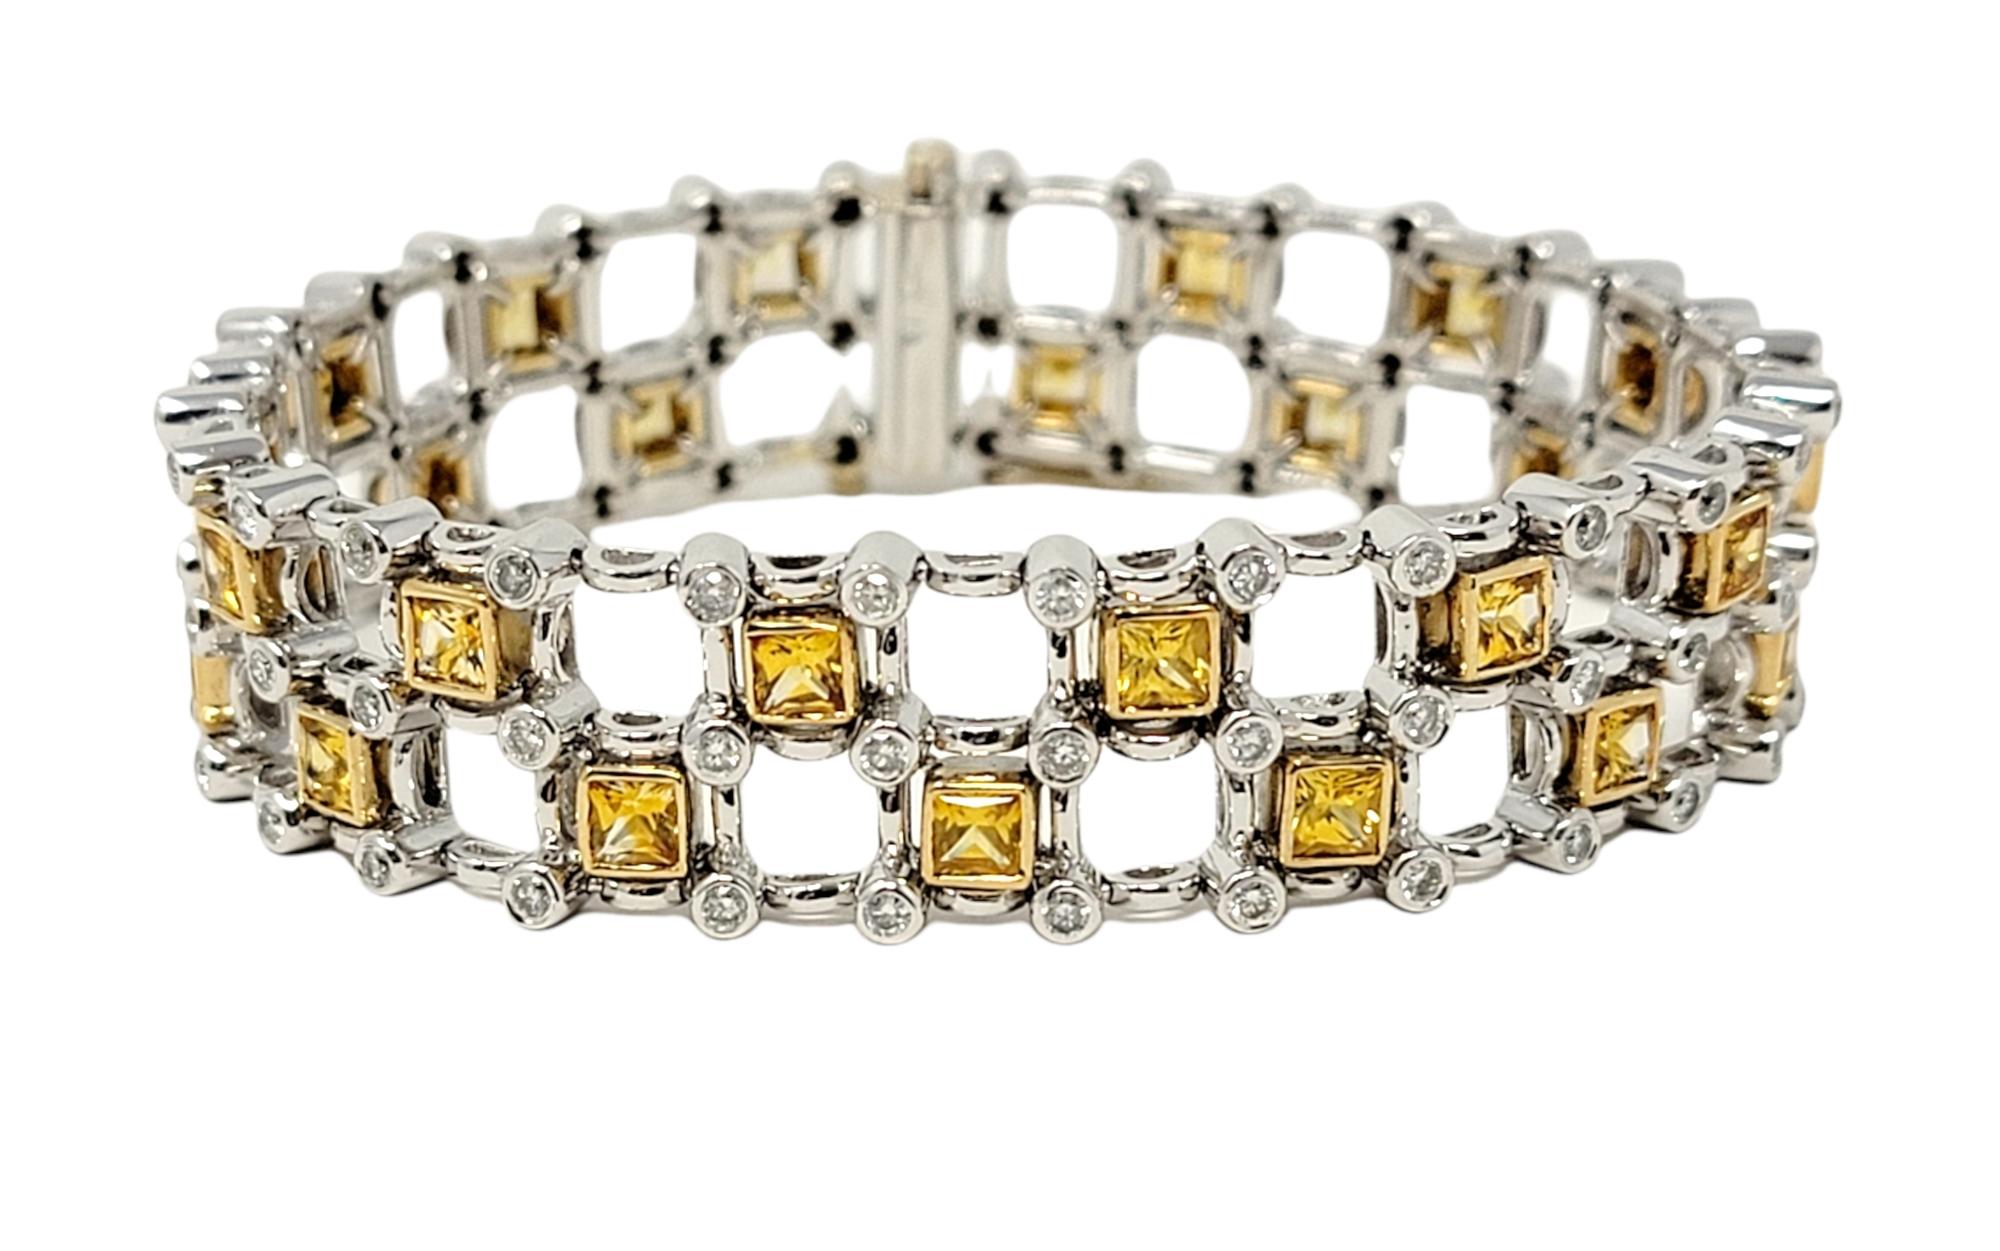 This gorgeous contemporary diamond and sapphire link bracelet will surround your wrist with modern luxury.  This colorful and sparkling piece features square shaped yellow sapphire stones bezel set in yellow gold in an alternating pattern throughout